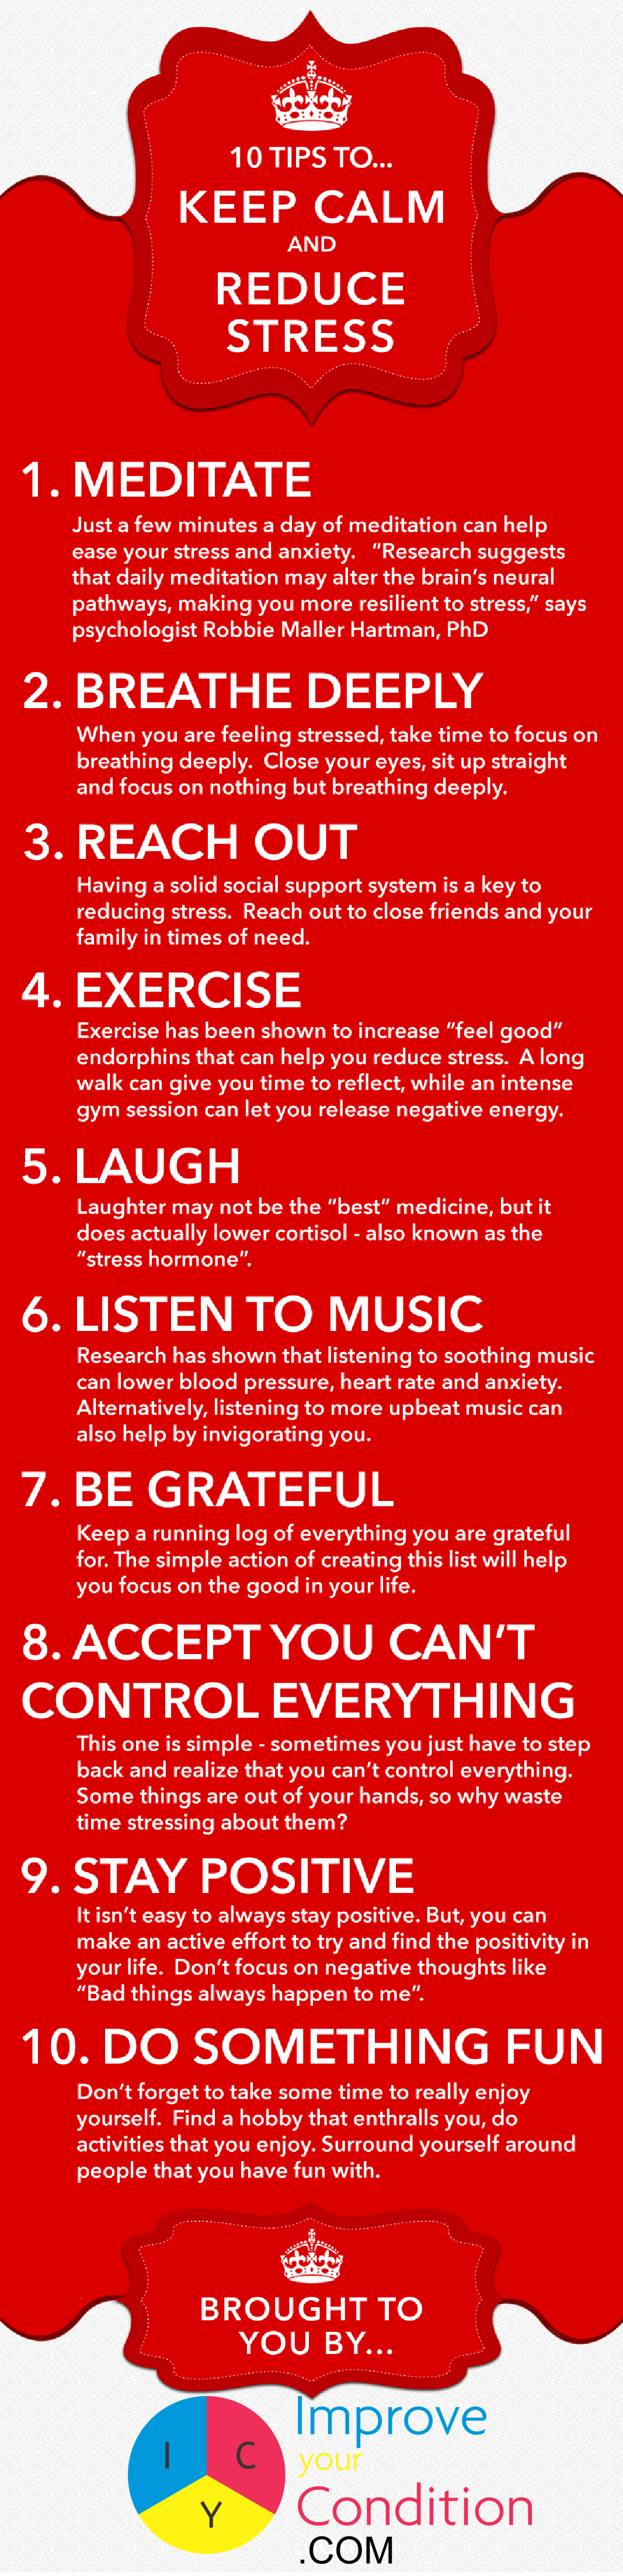 Stress-relieving Tips 